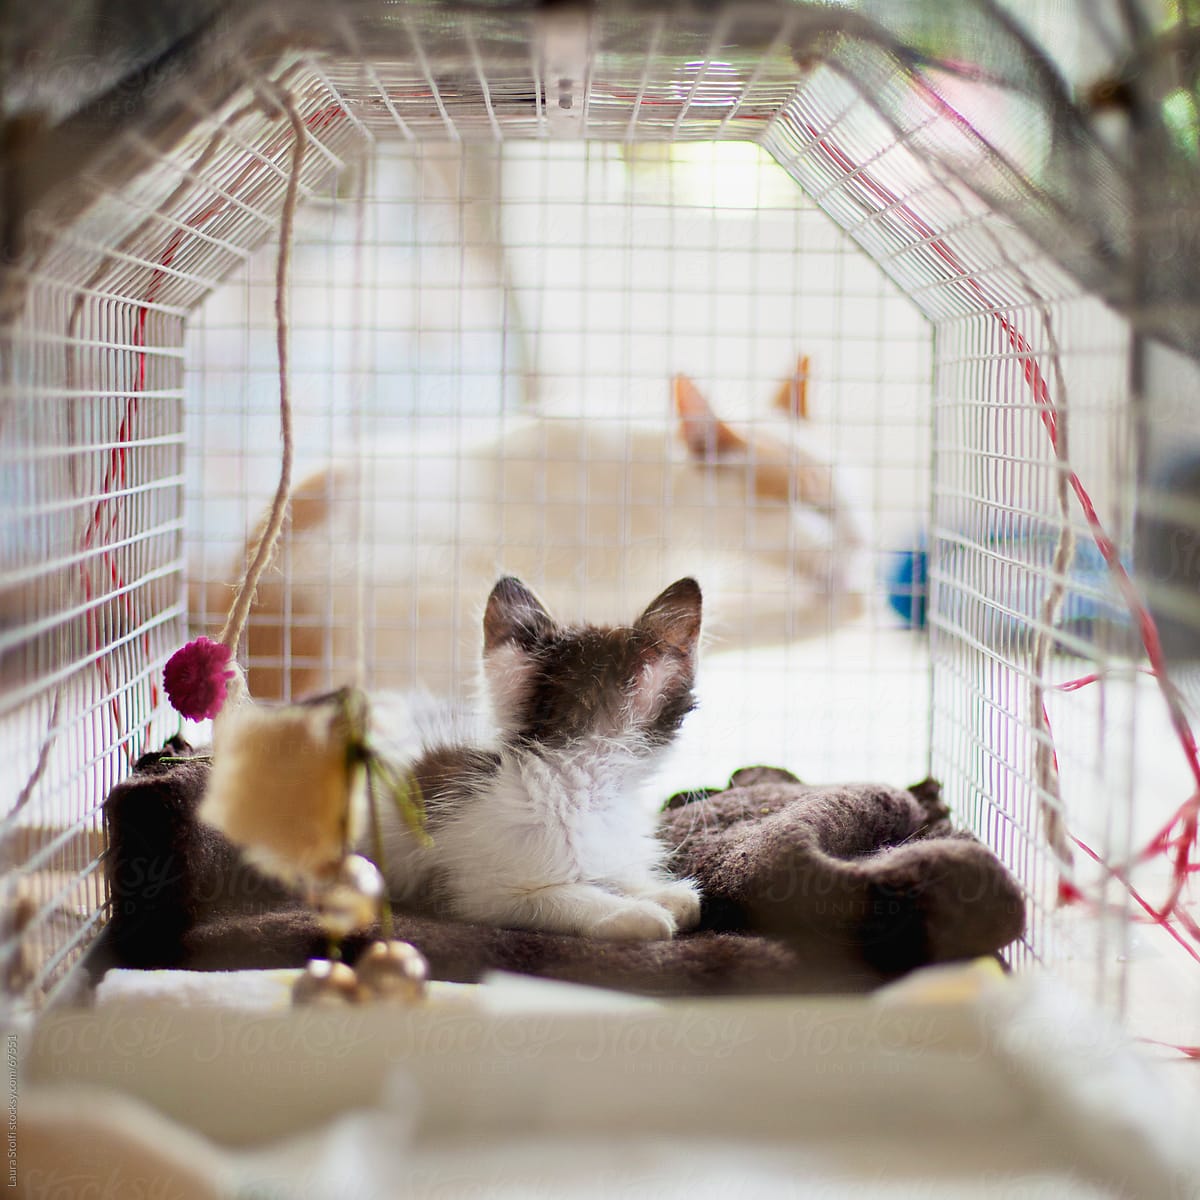 Recovering kitten in cage looking at an adult cat out of the cage